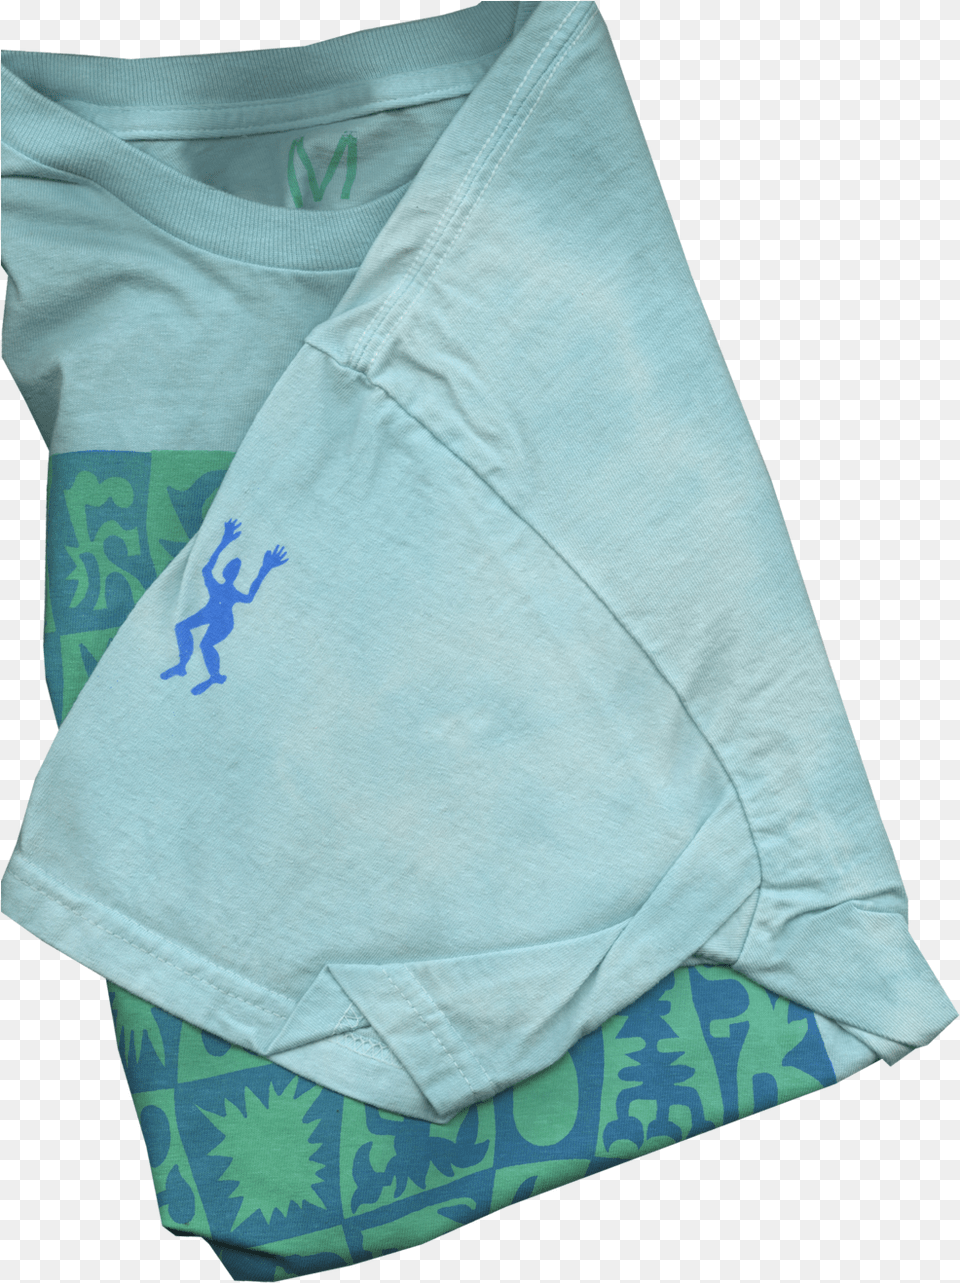 Magic Carpet Sleeve Cool Triangle, Clothing, Shirt, Blanket, Diaper Png